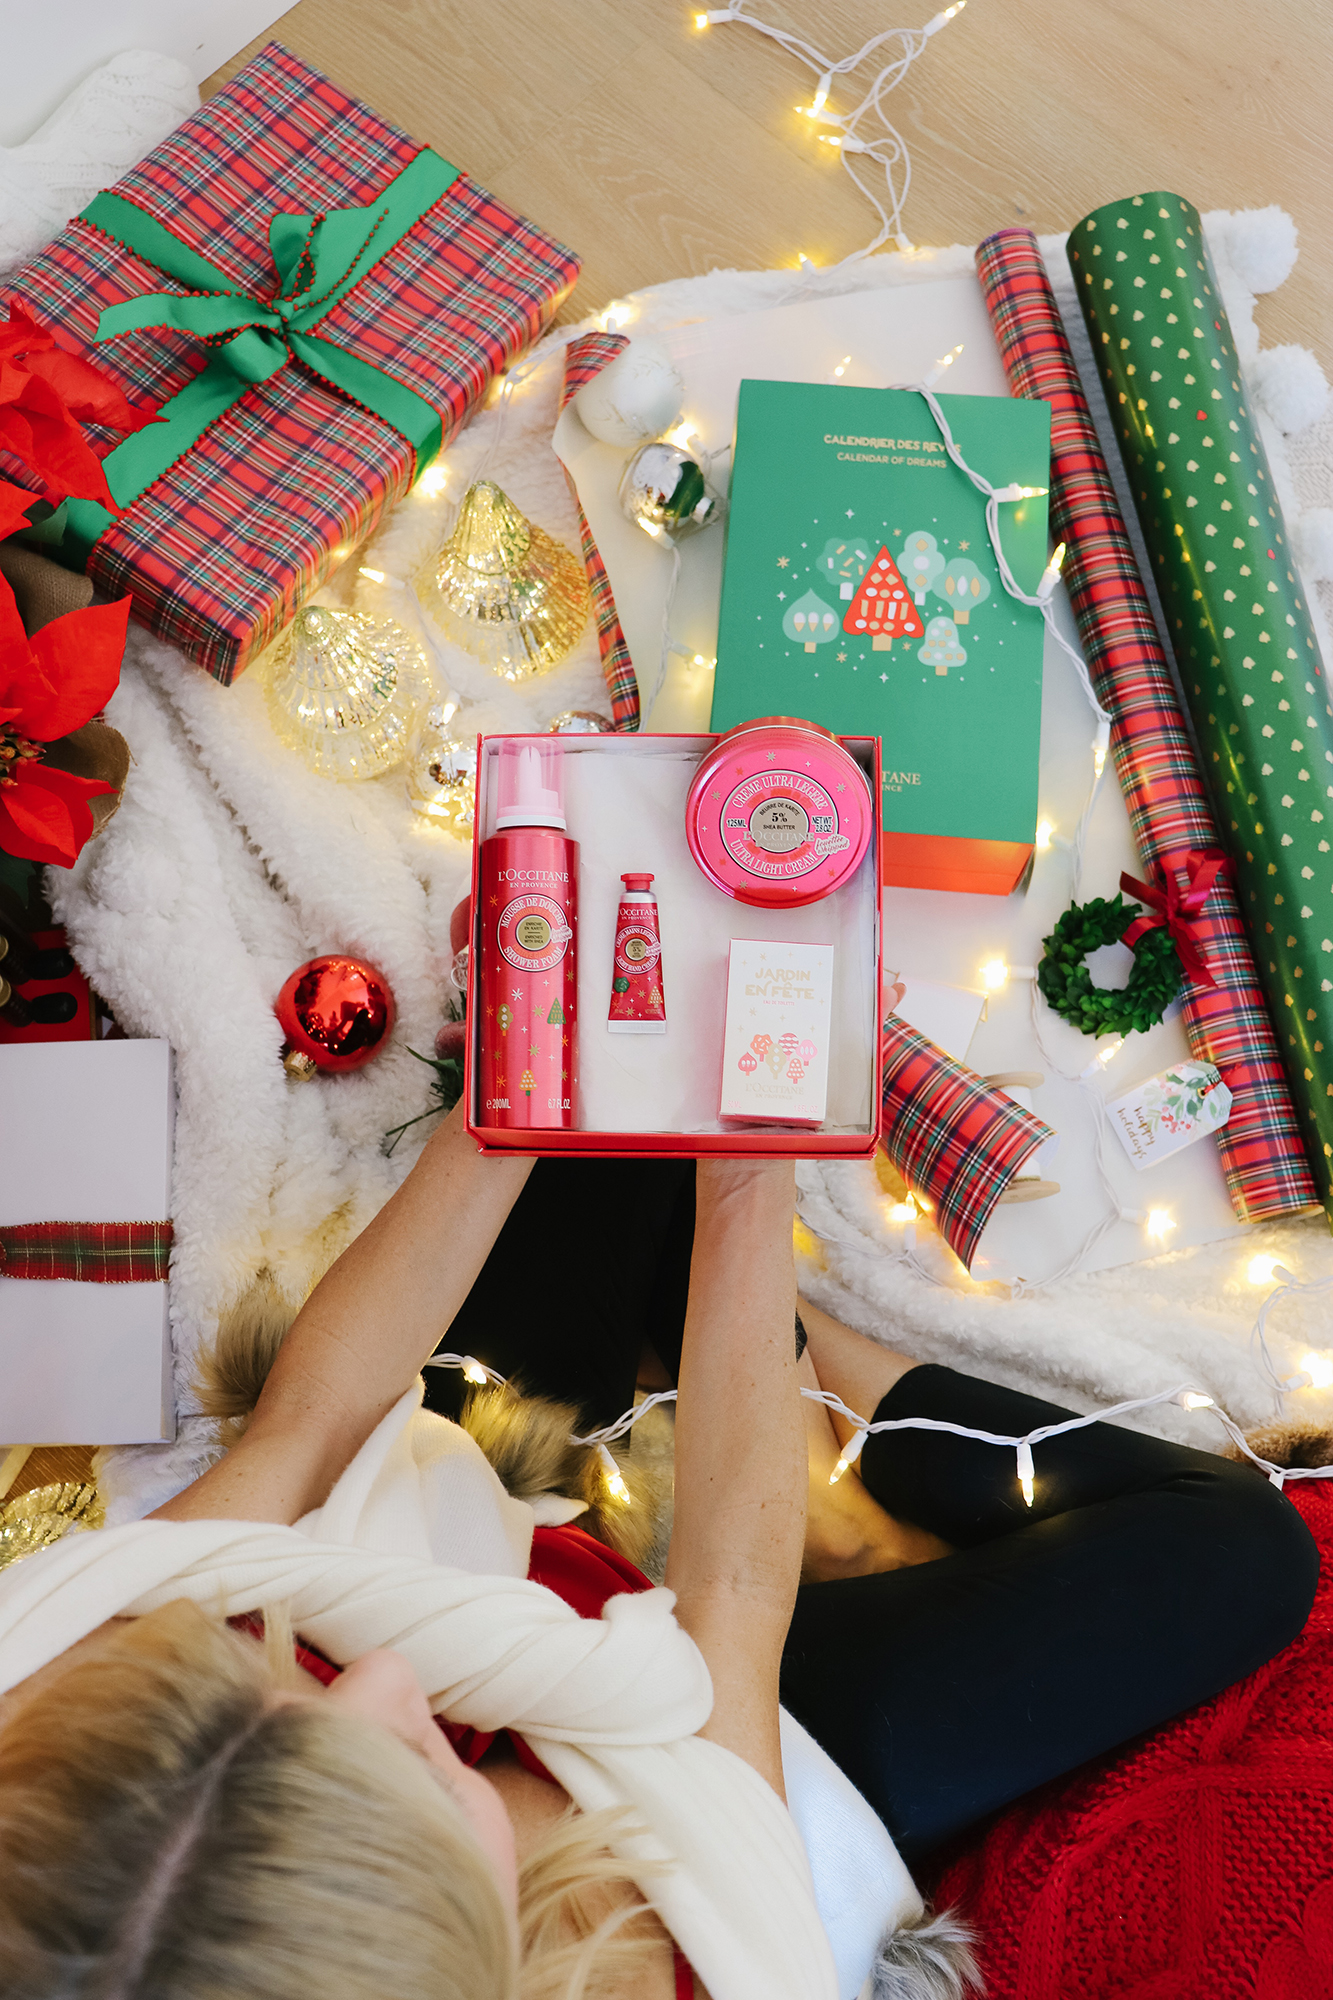 L'Occitane Holiday Beauty Gift Set Guide 2019 - Affordable & on-sale beauty gifts from the French company L'Occitane! All so beautiful. 